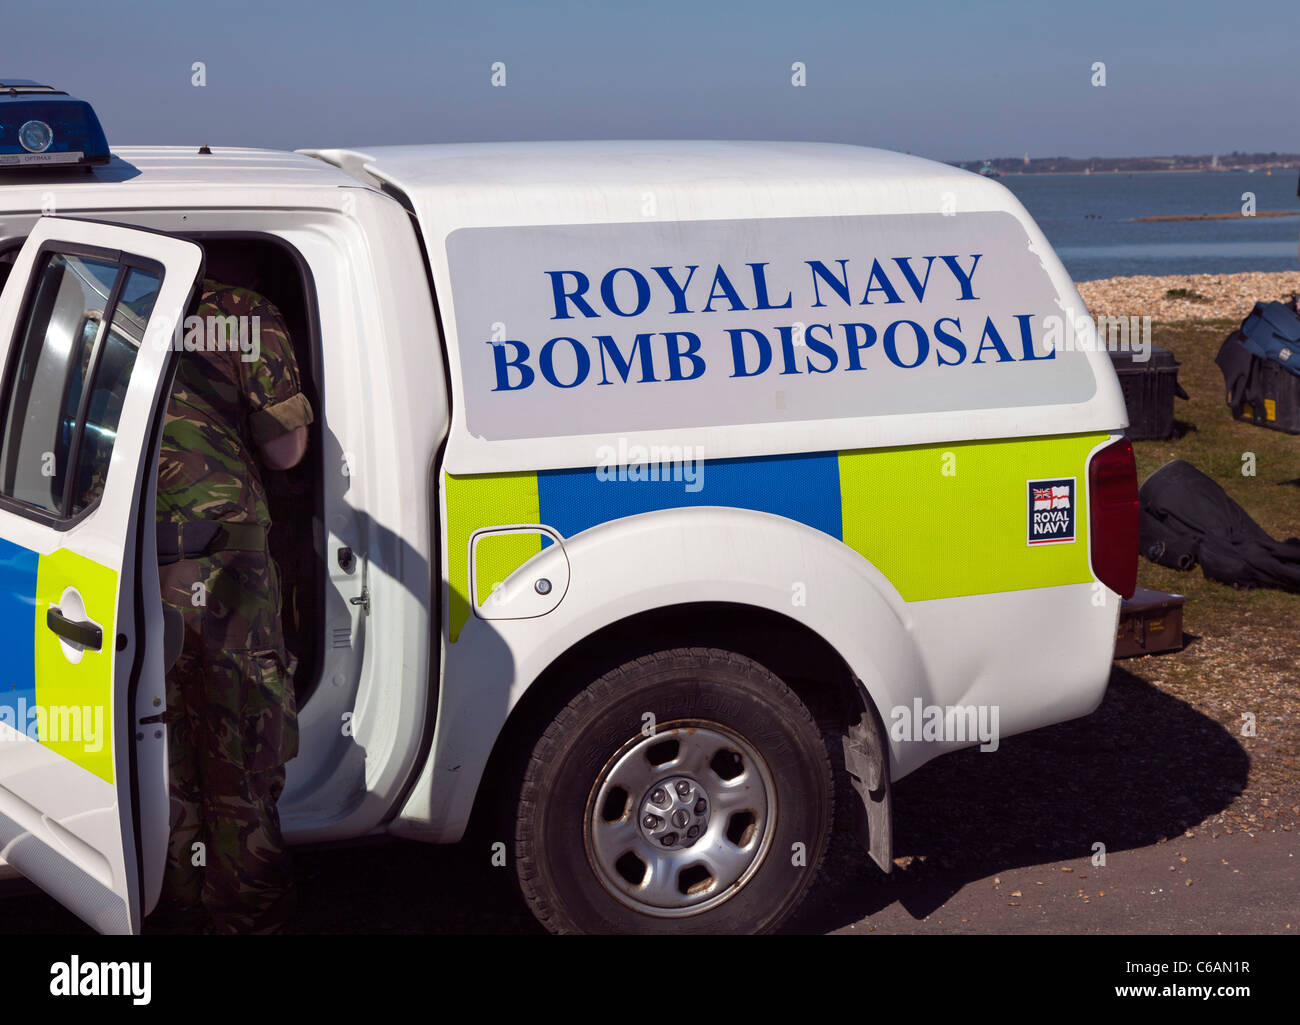 Royal Navy Bomb Disposal vehicle van emergency response diffuse make safe blow up professional army trained secure security dive Stock Photo